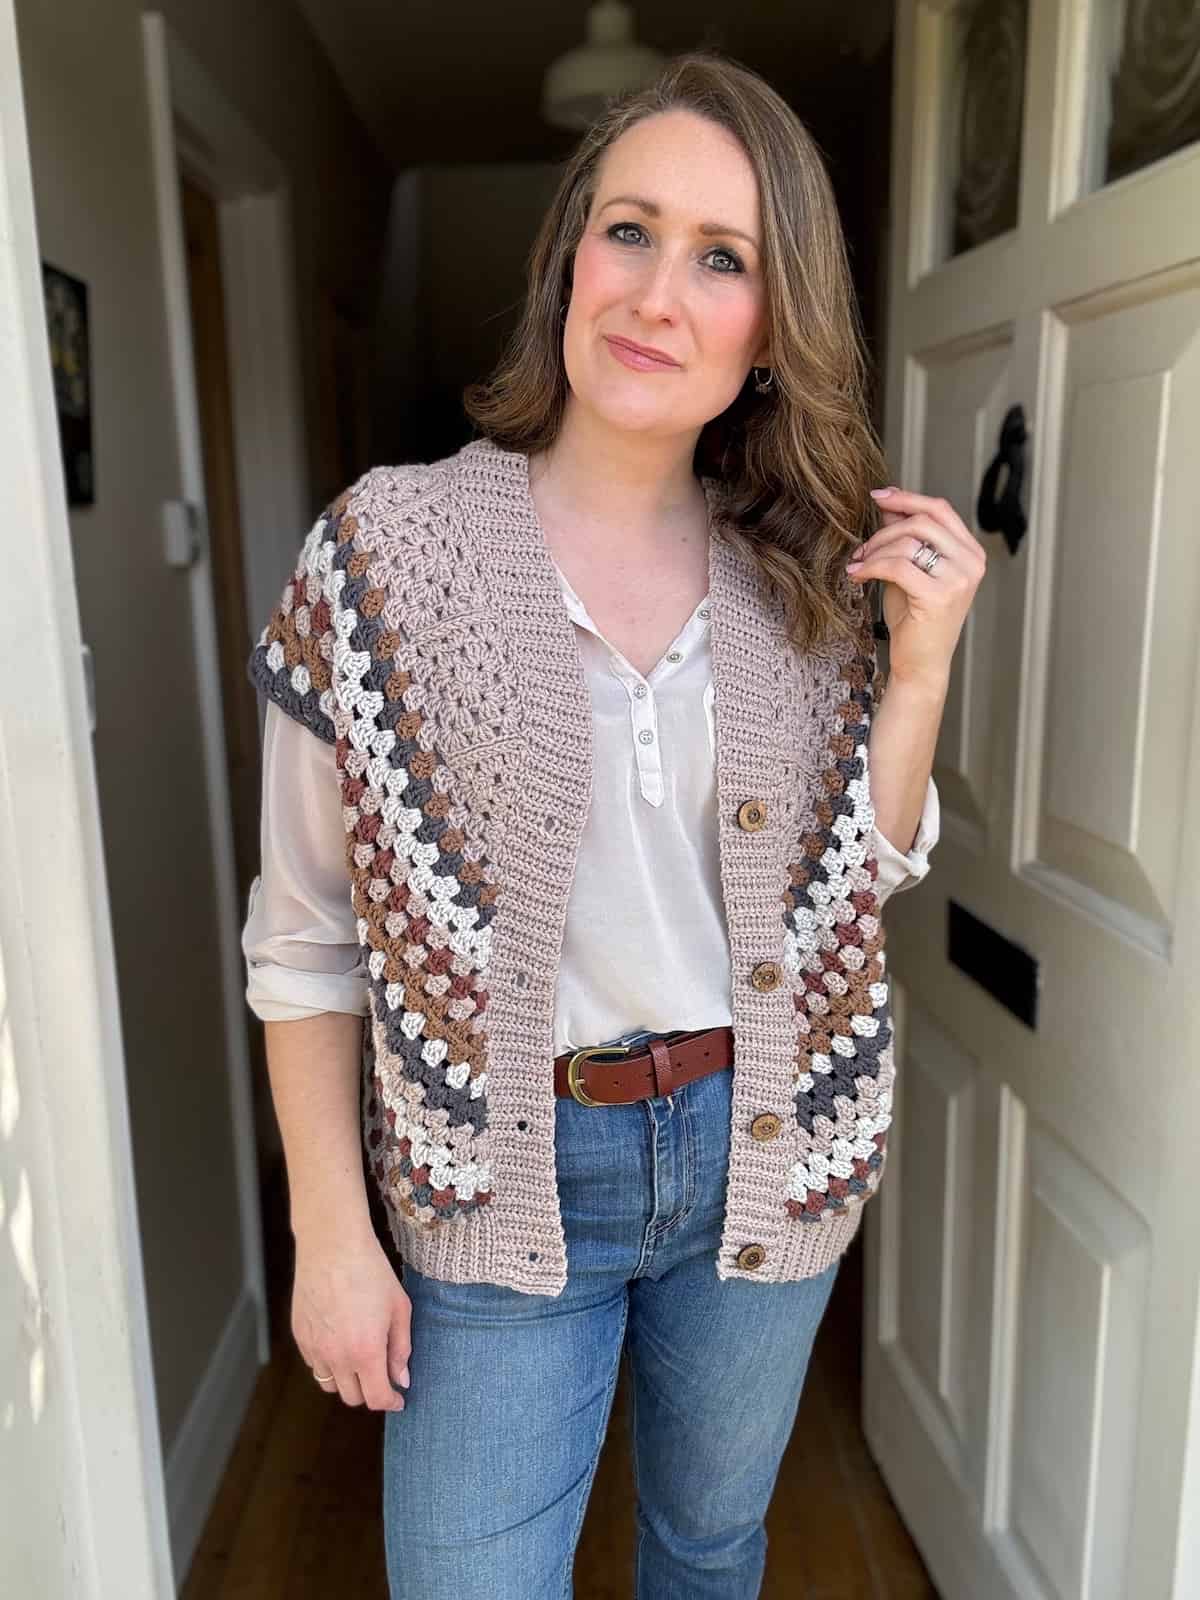 Woman in a retro crochet vest and jeans standing indoors.